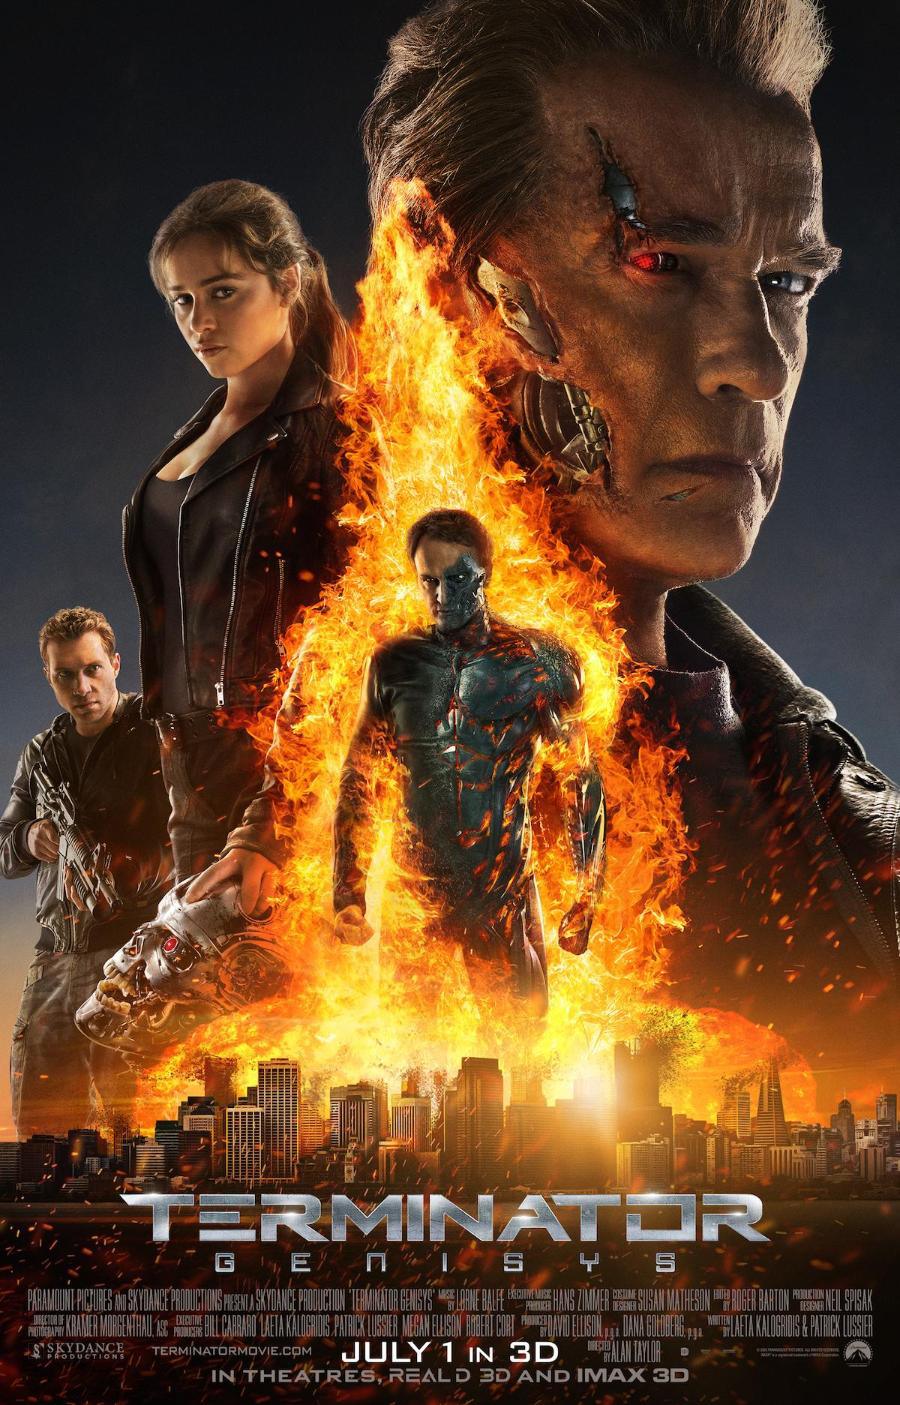 Terminator Genisys film review: is Arnie back for good?